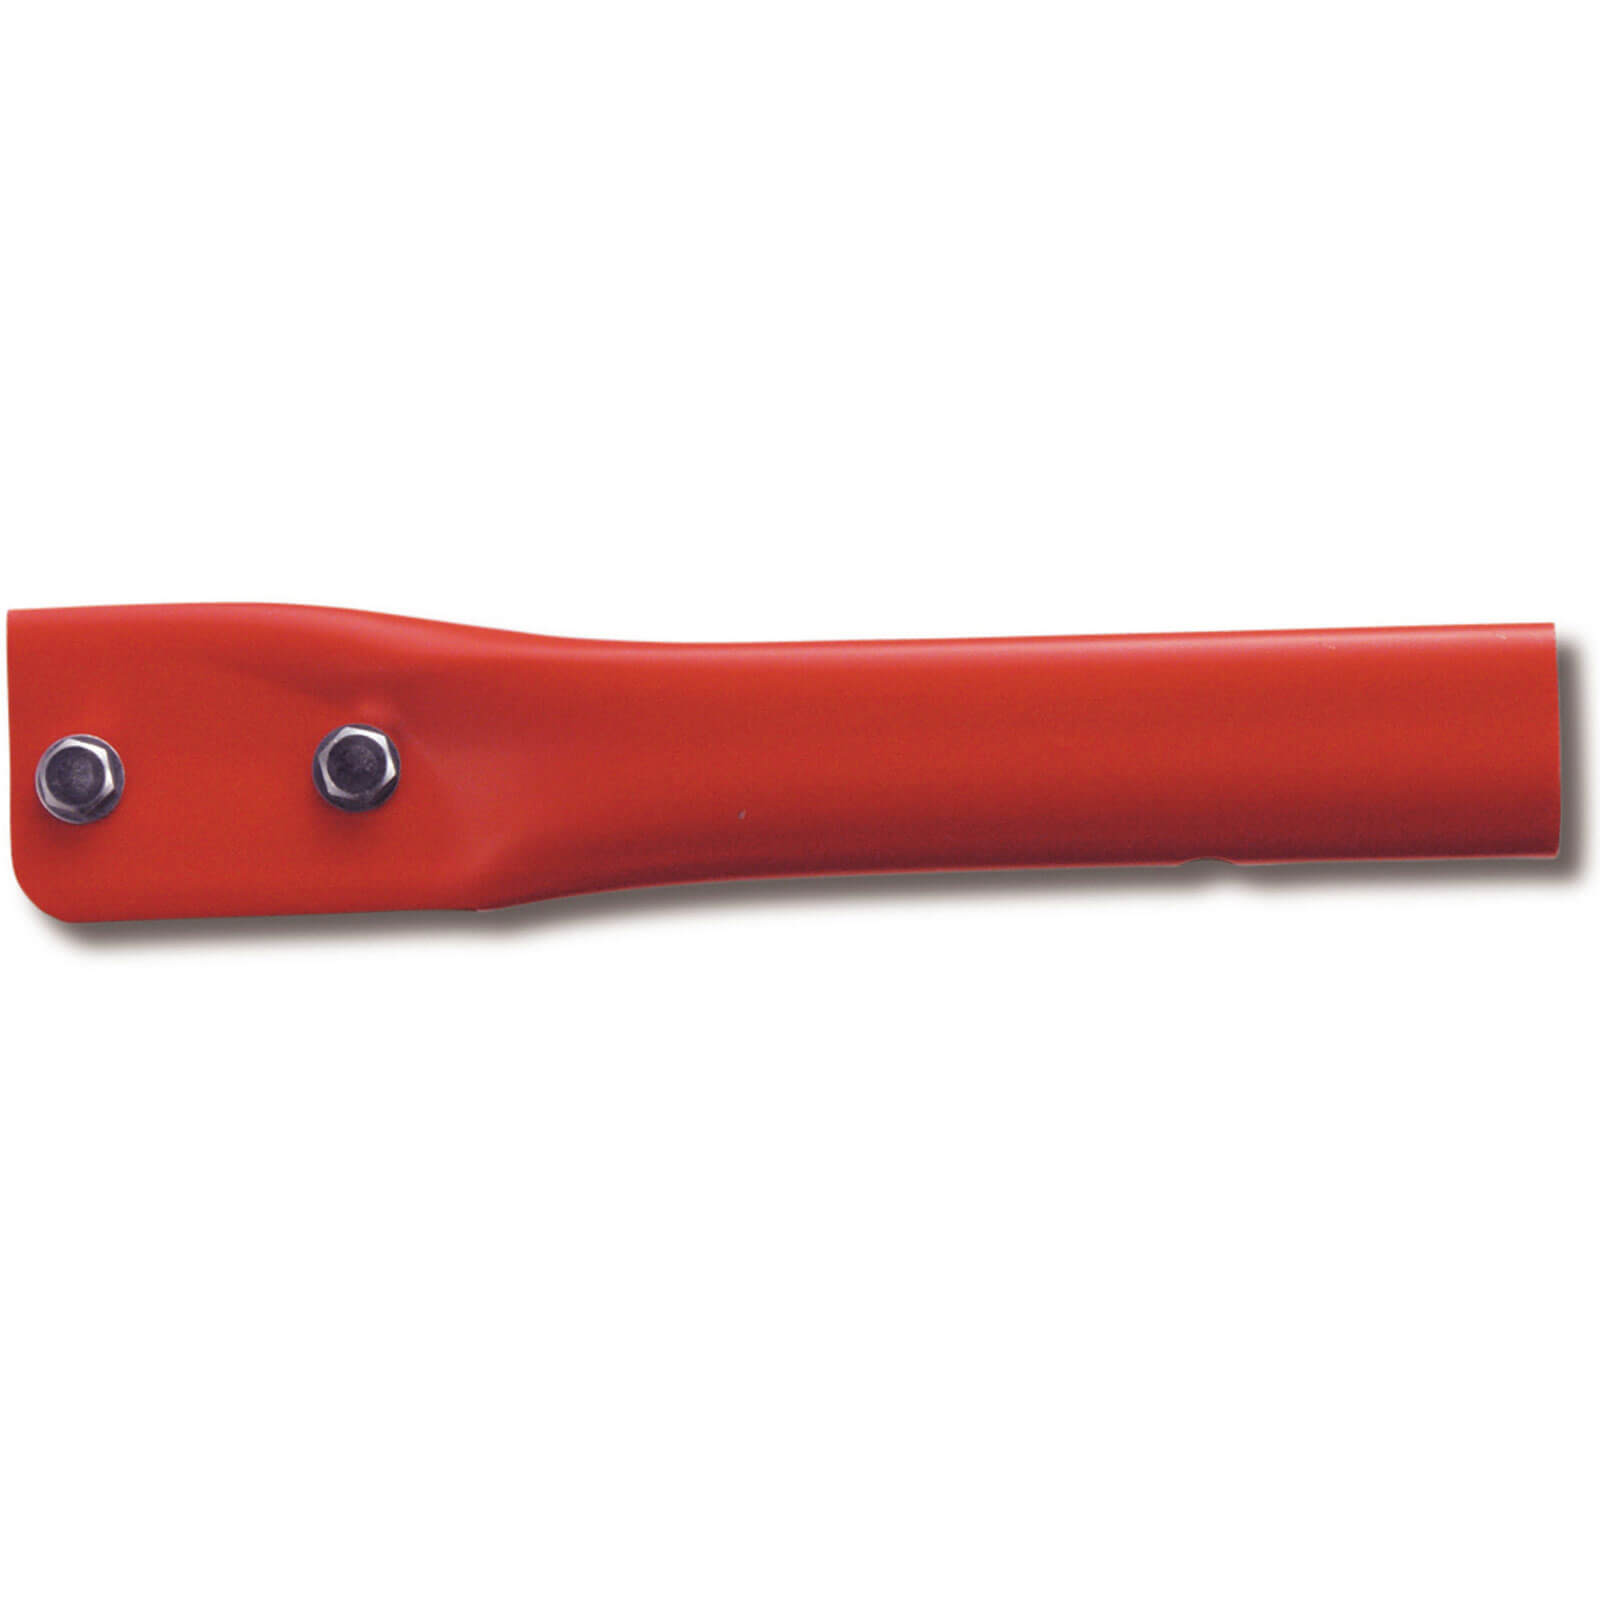 Image of ARS Pole Saw Blade Grip for UV/CT-34 and UV/CT-32 Pro Exp